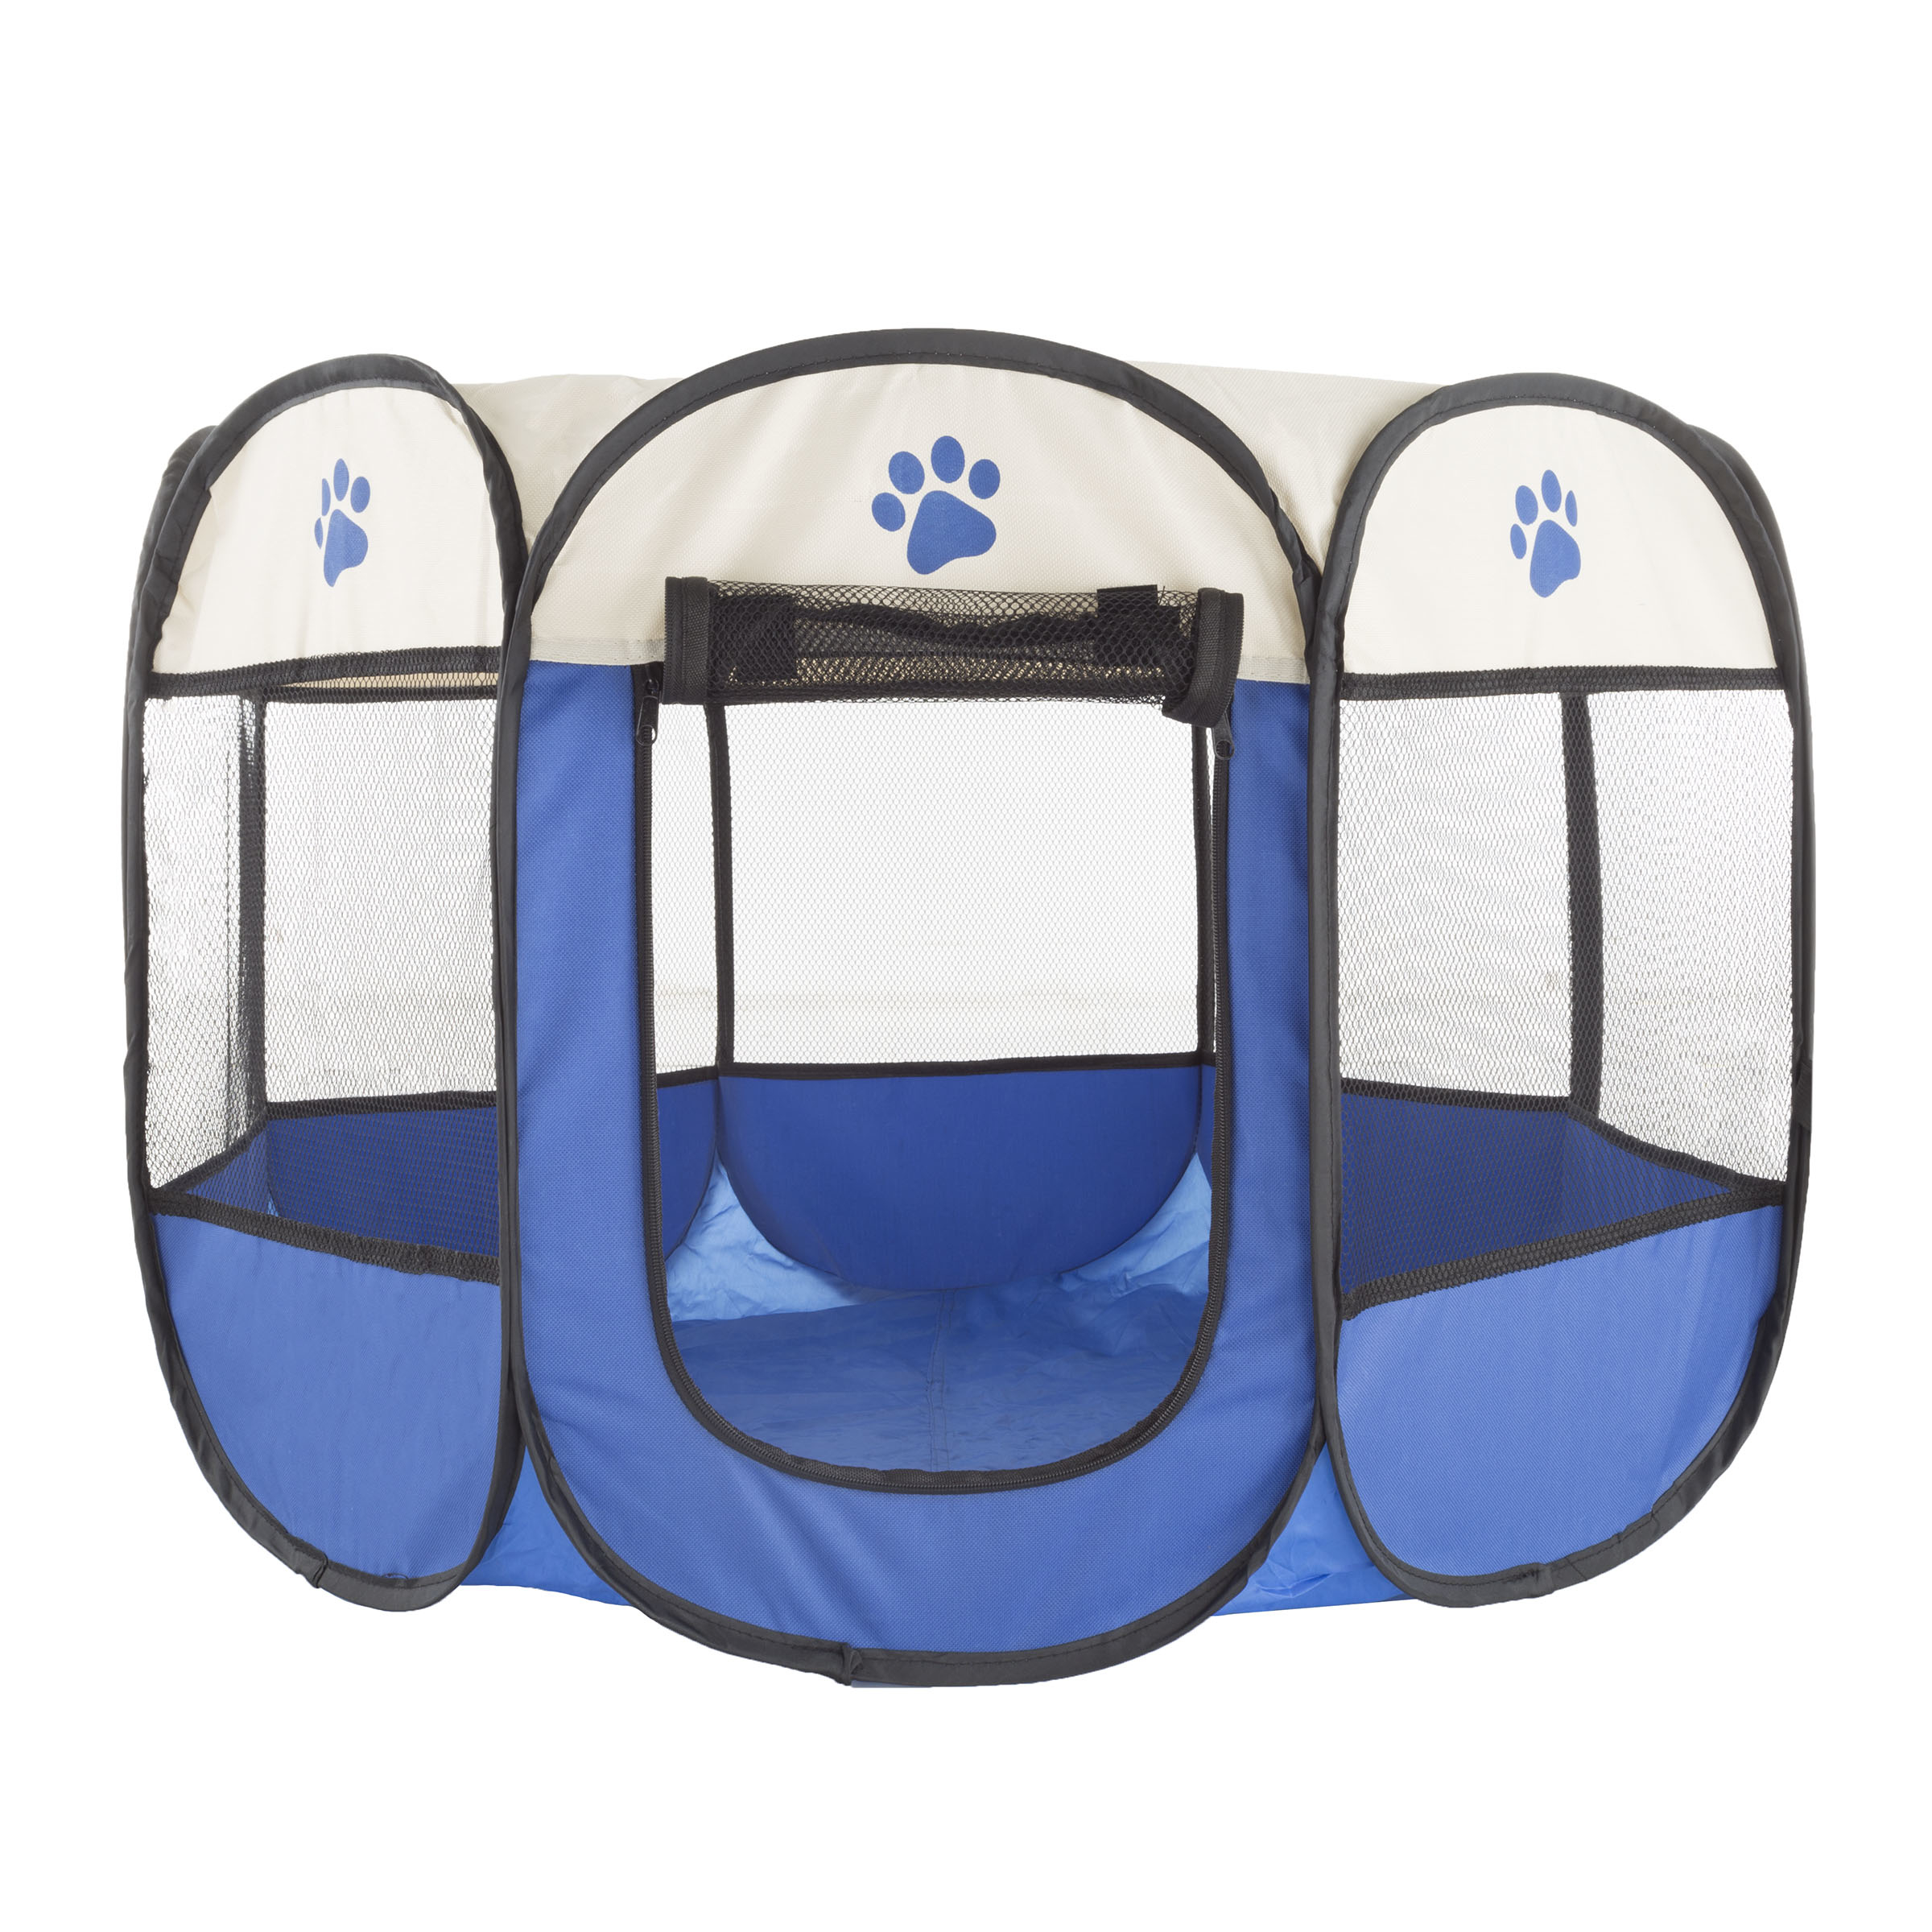 Pop Up Dog Portable Playpen Animal Cage 26 Inch Small Cats Dogs Puppy Indoor Outdoor